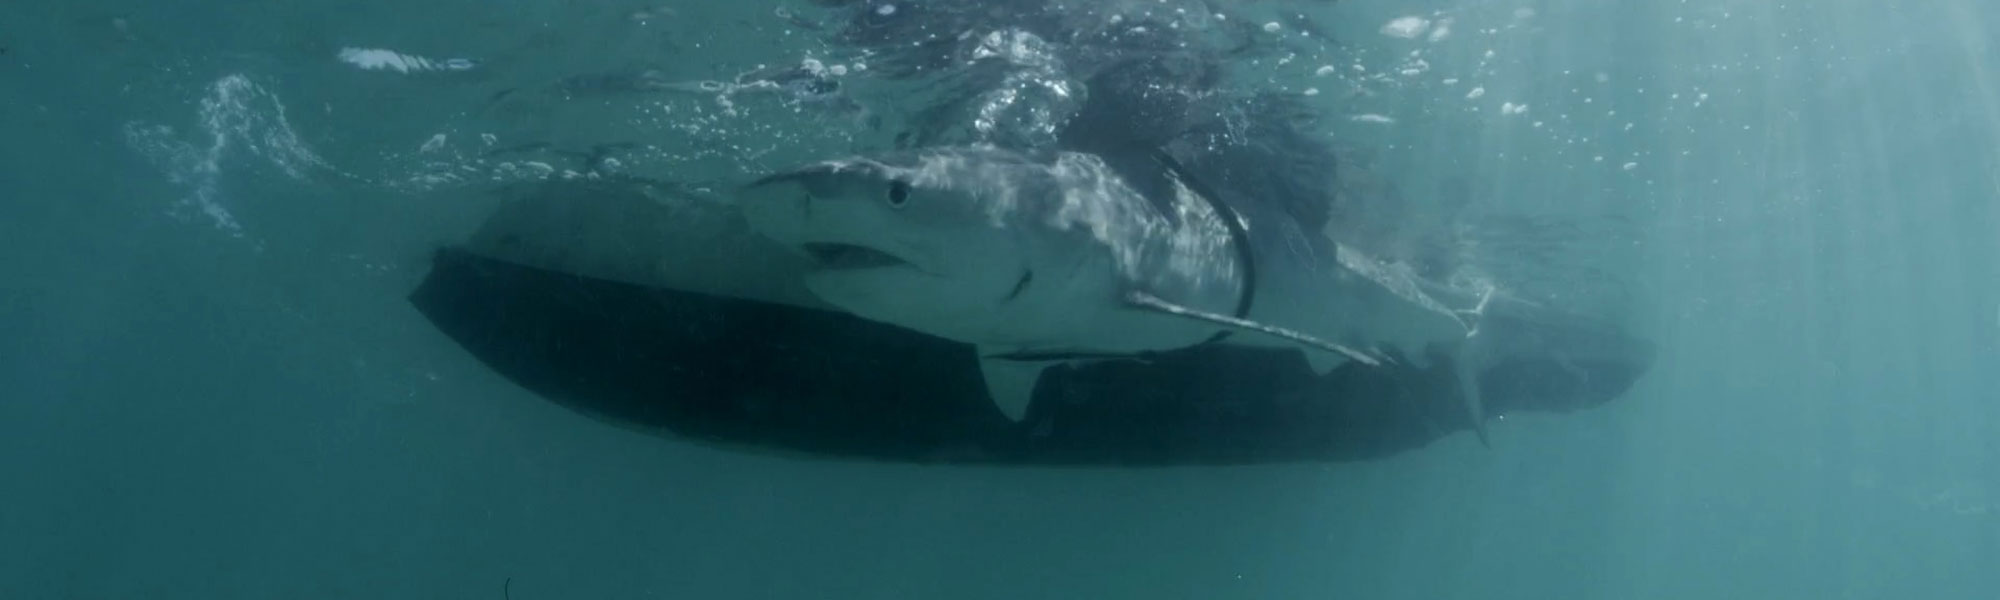 Biopixel Oceans Foundation Adds Several Tiger Sharks to OCEARCH Tracker